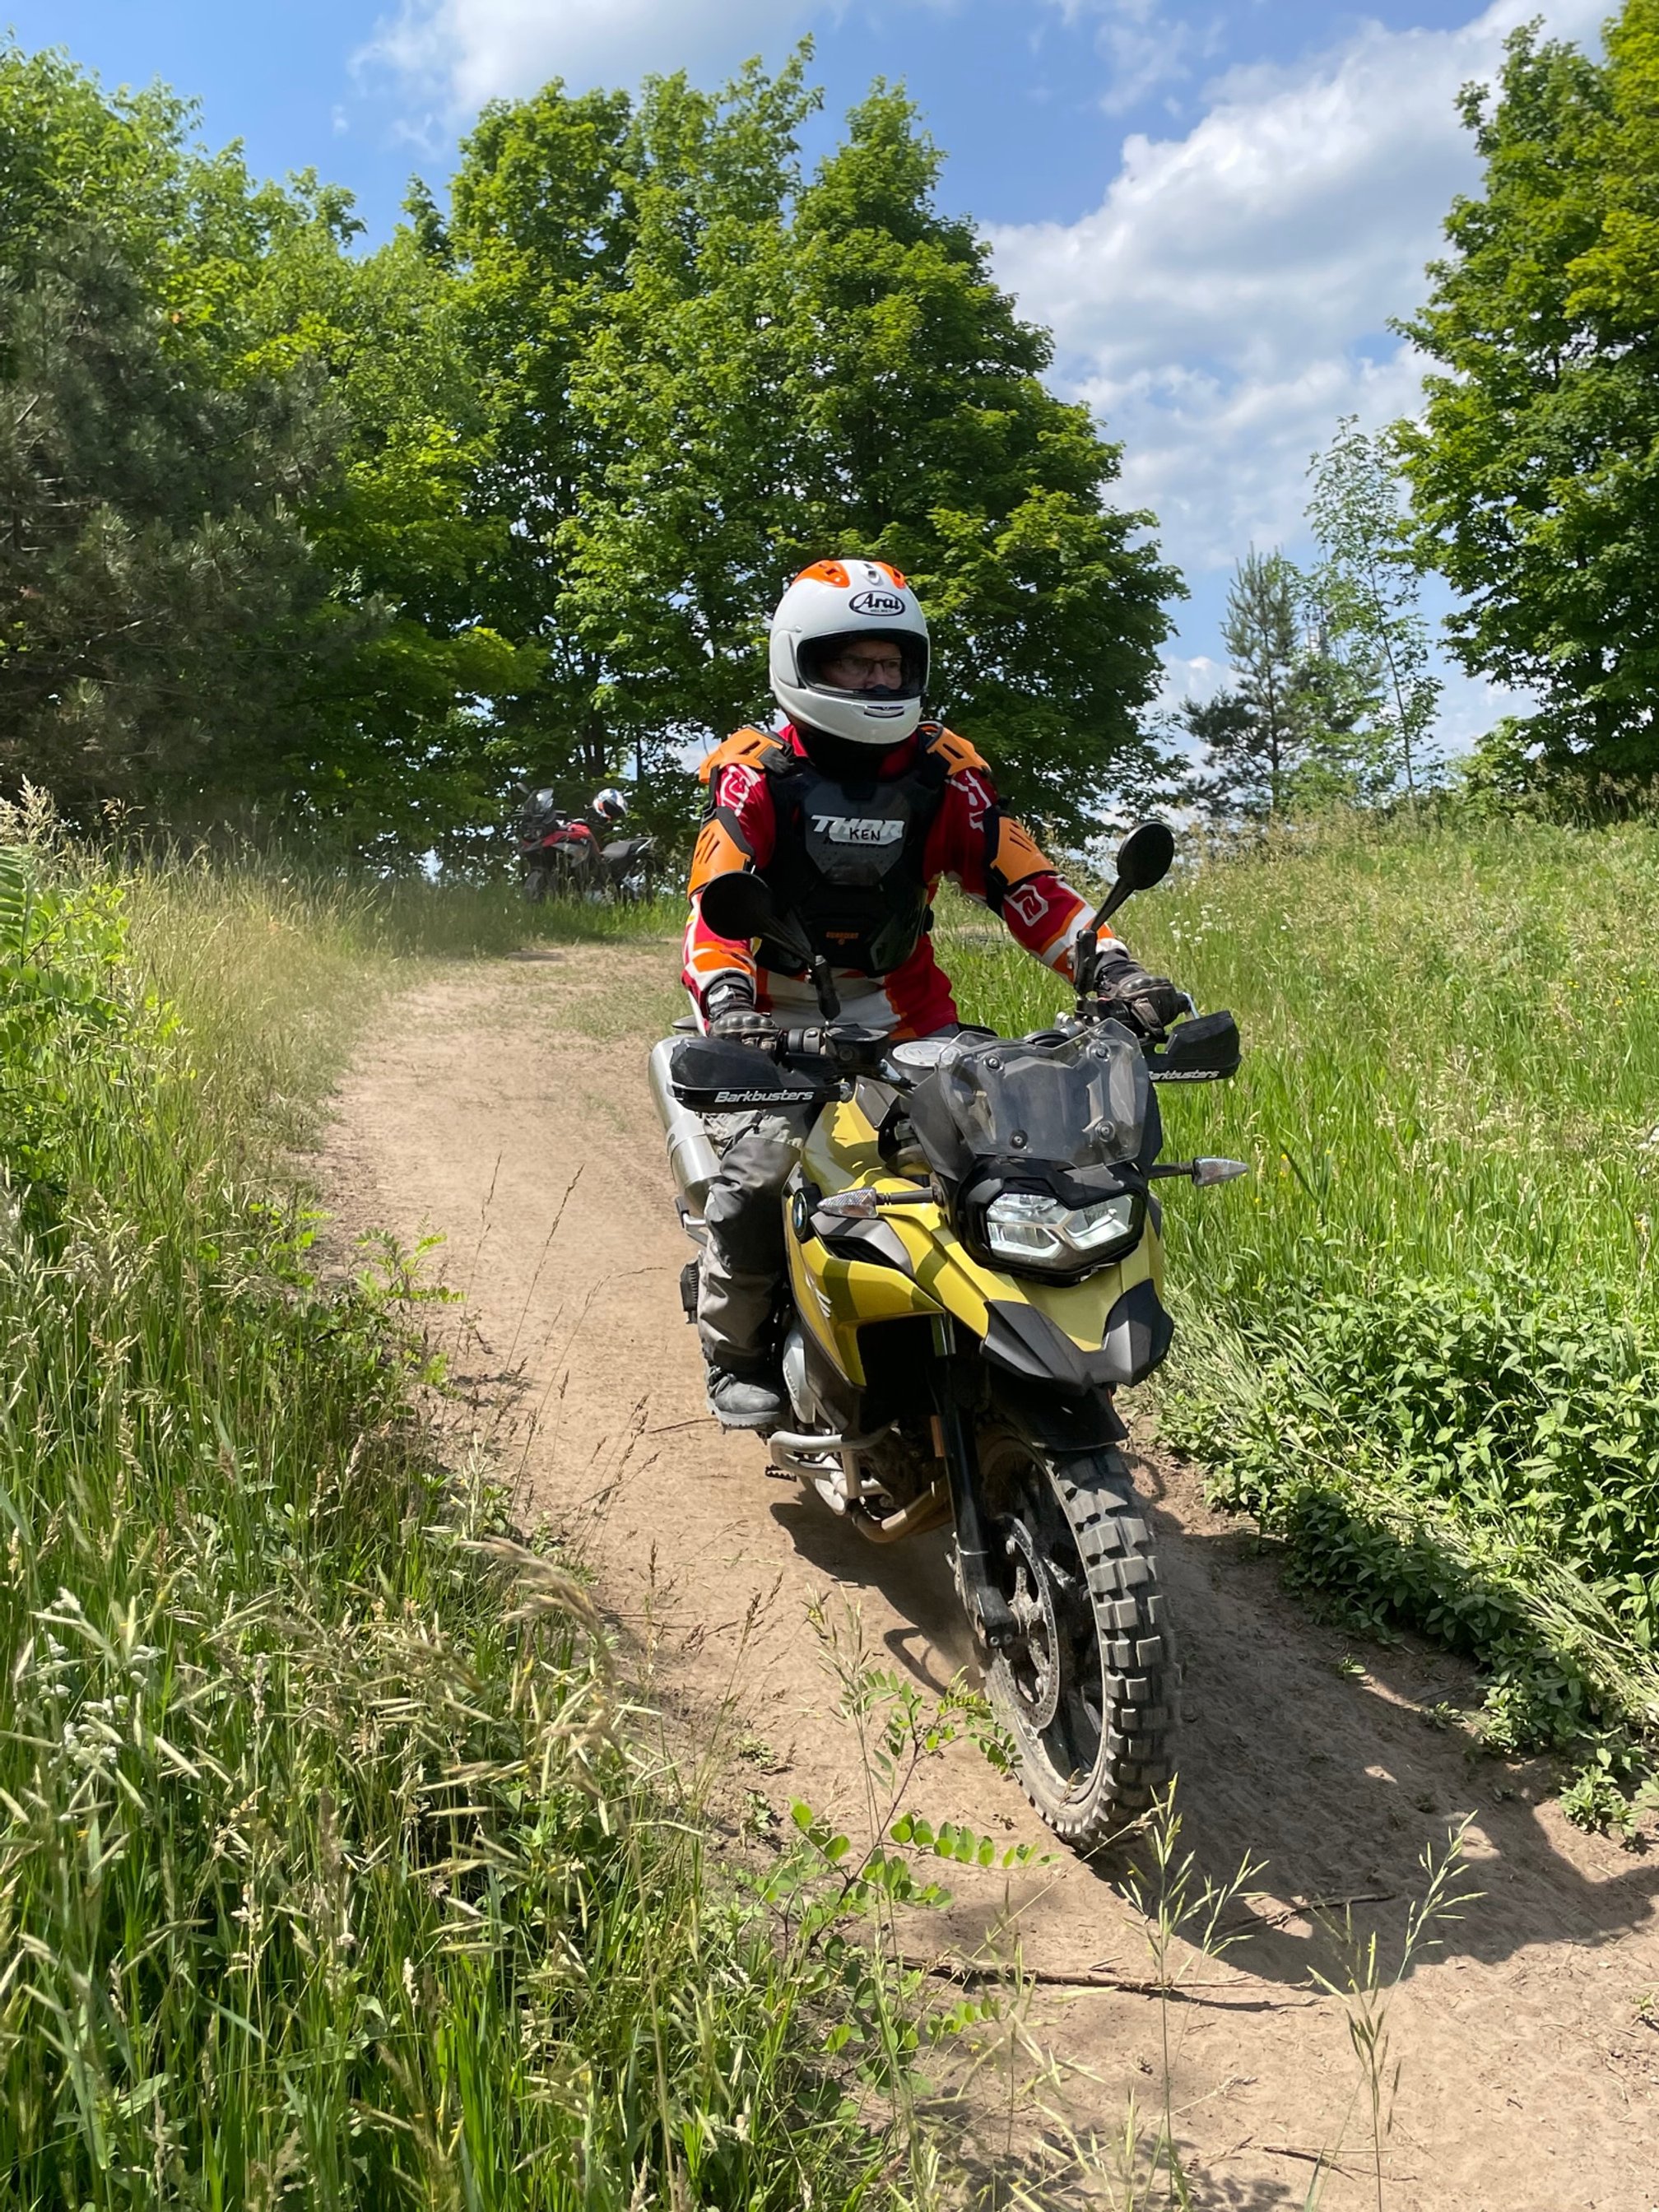 Adventure motorcycle riding on a rough dirt trail.